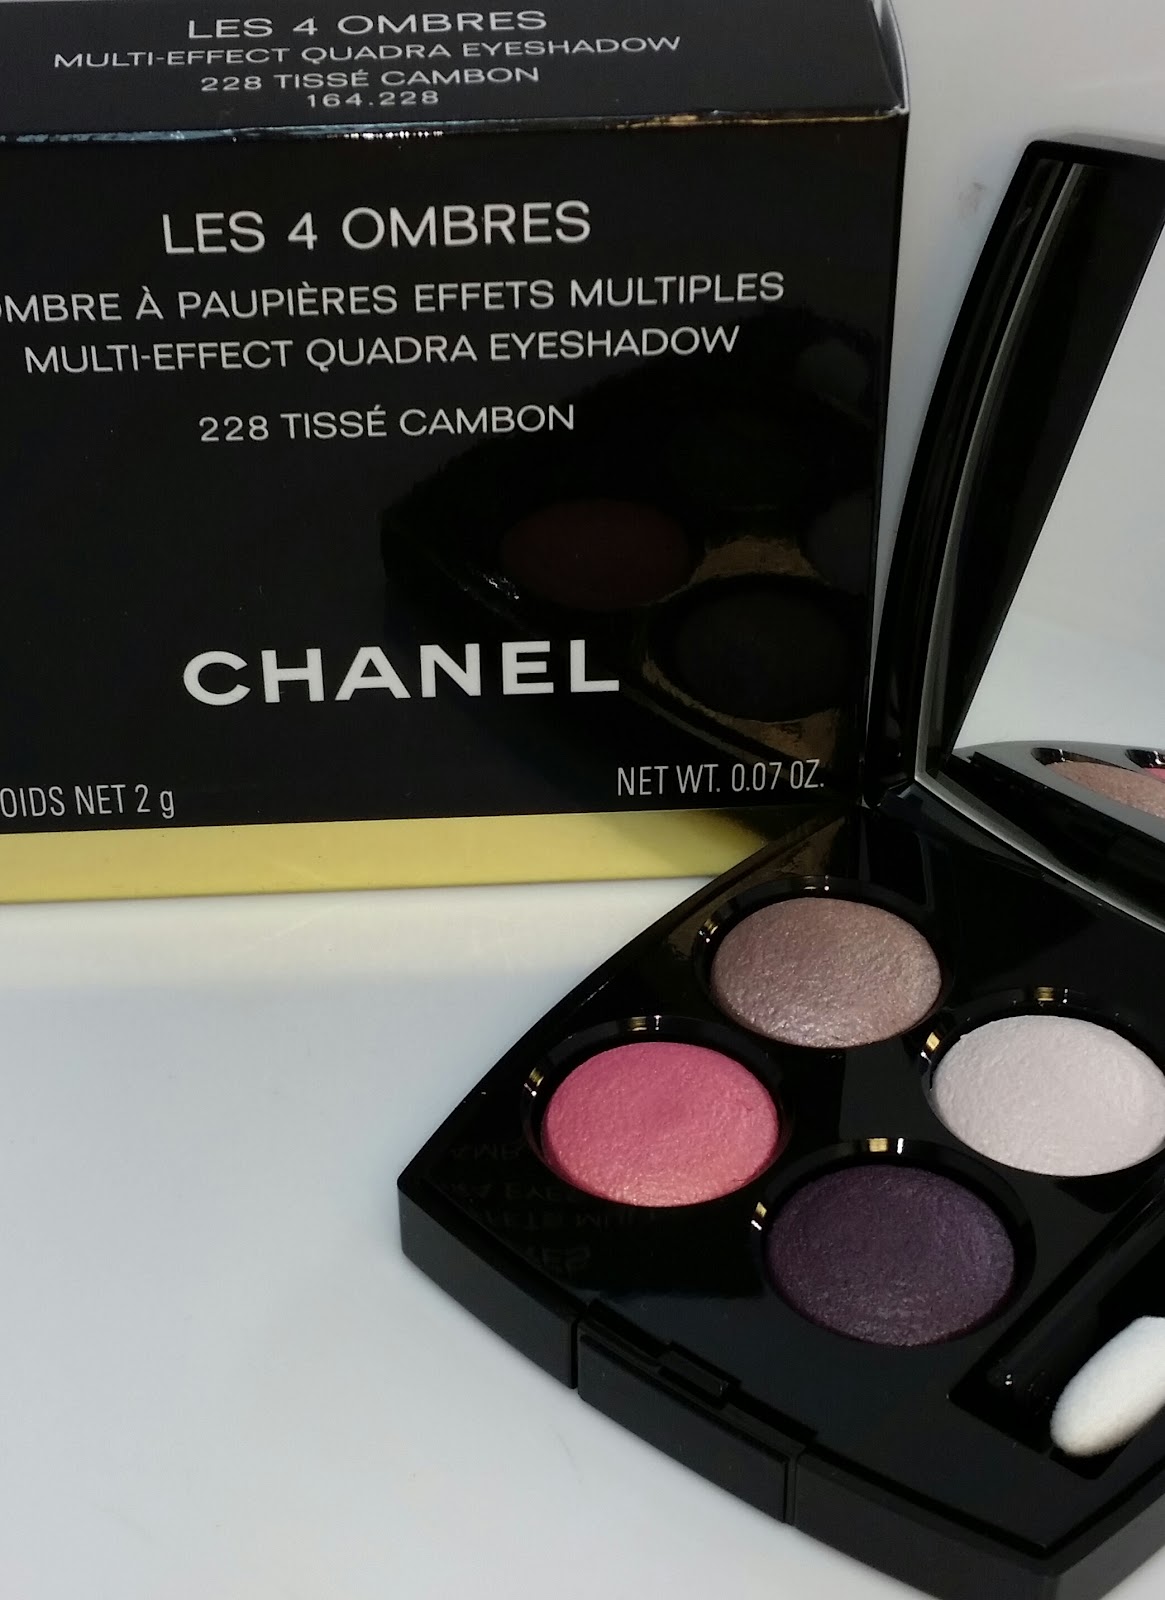 CHANEL LES 4 OMBRES 0.07 EYESHADOW #268 CANDEUR ET EXPERIENCE